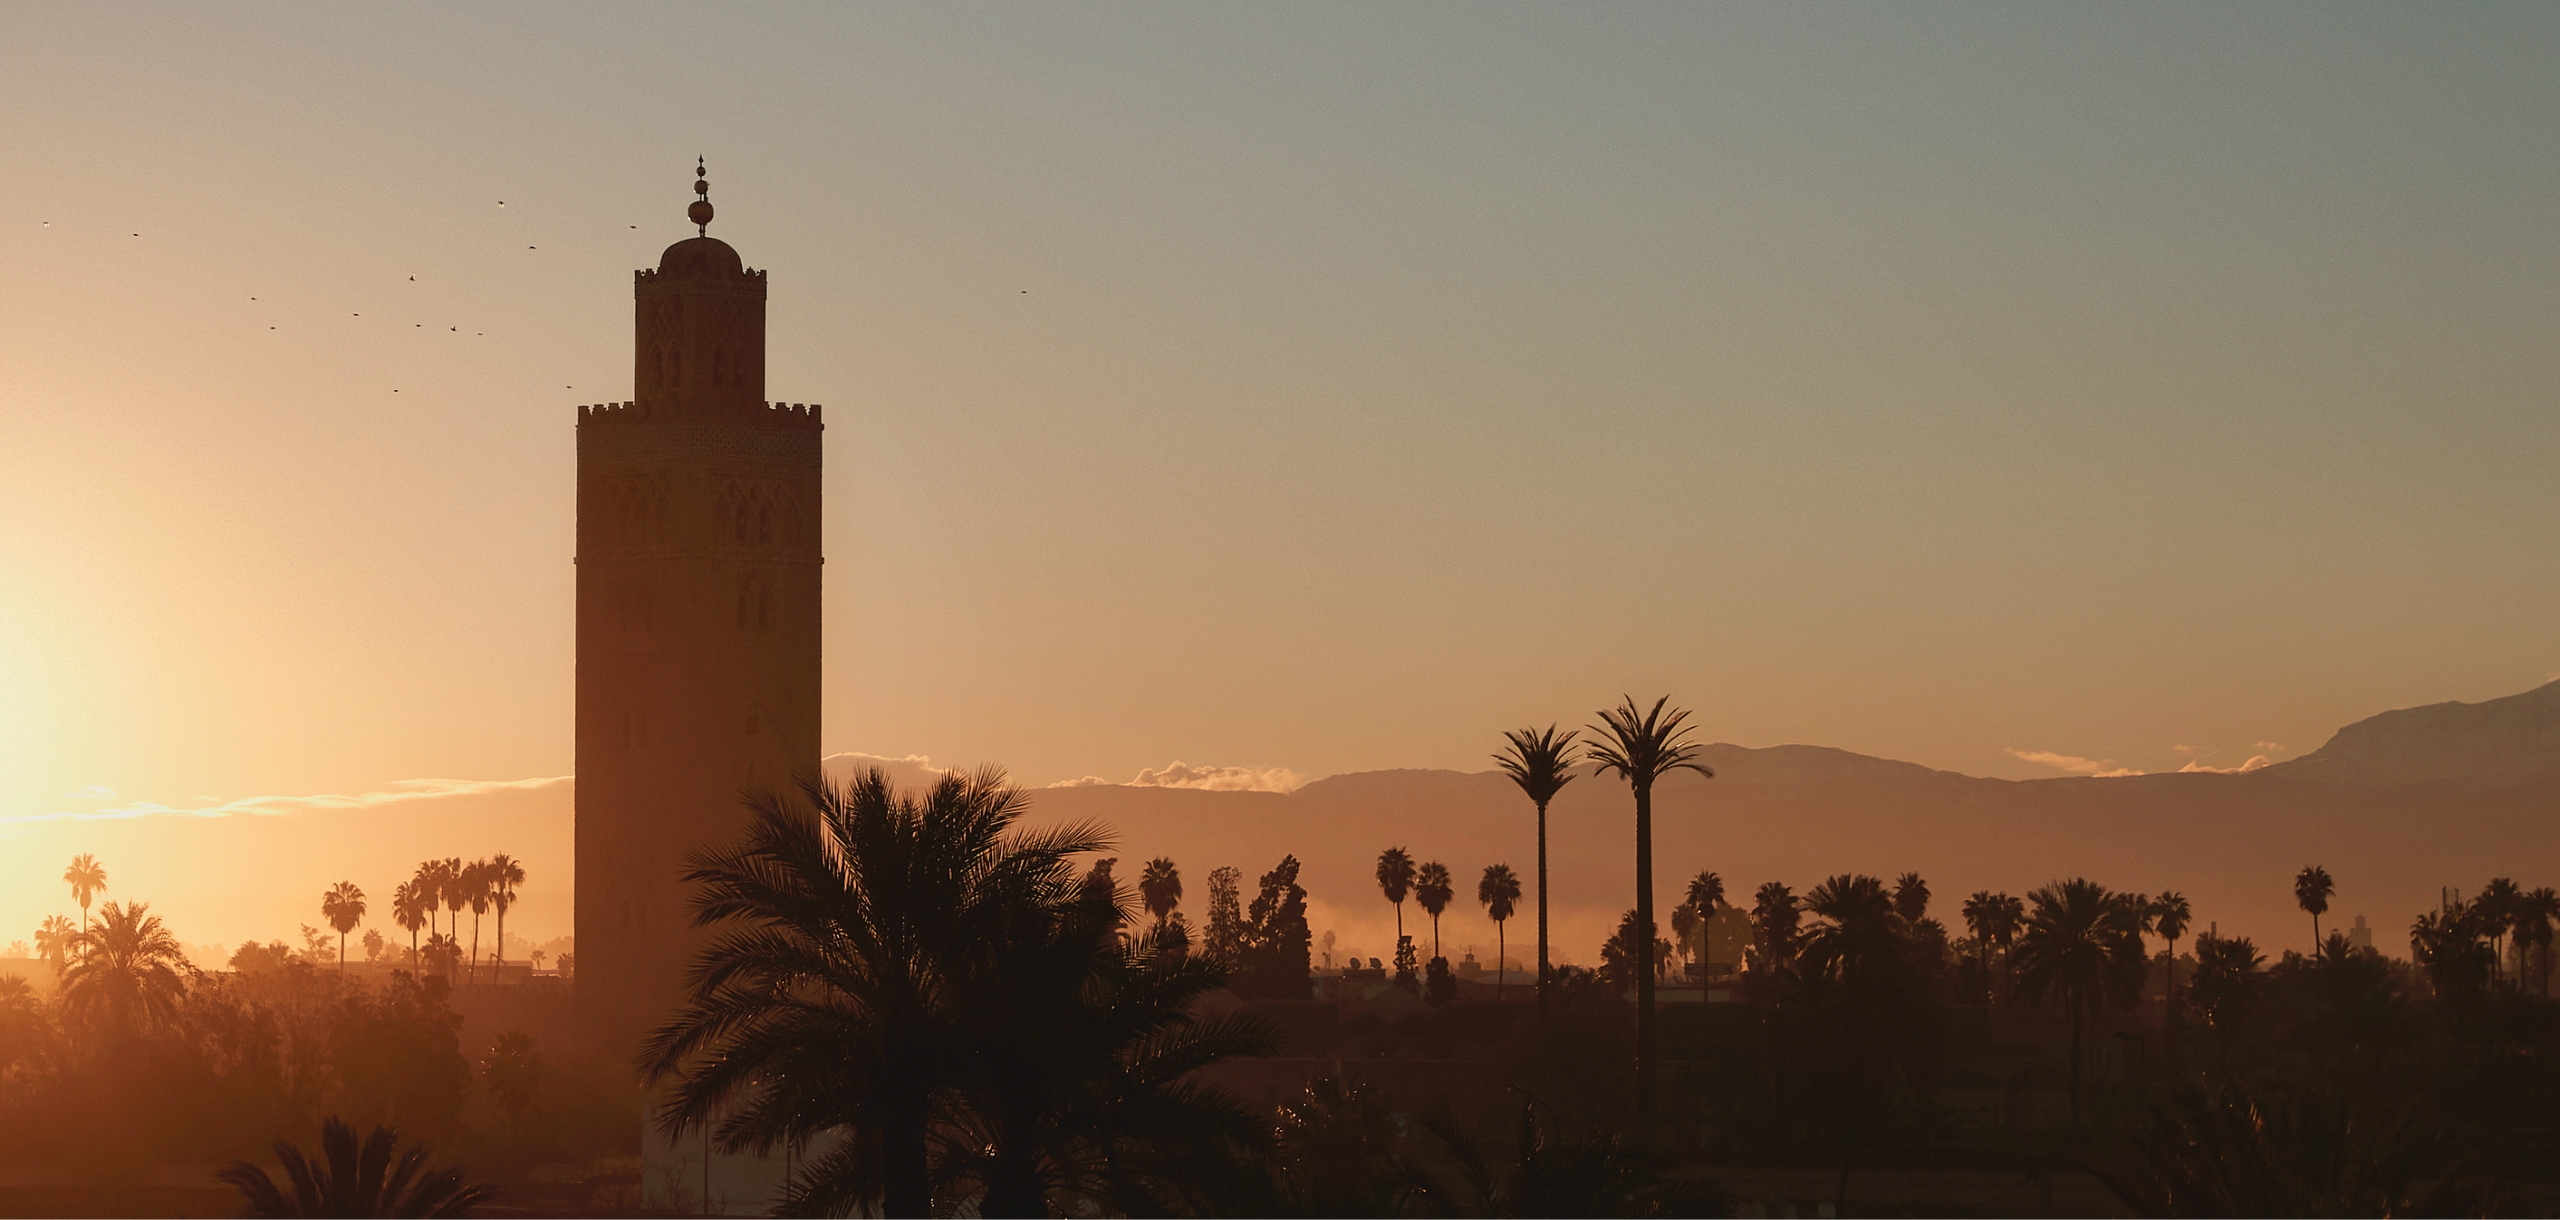 A look at Marrakech’s old city during sunset